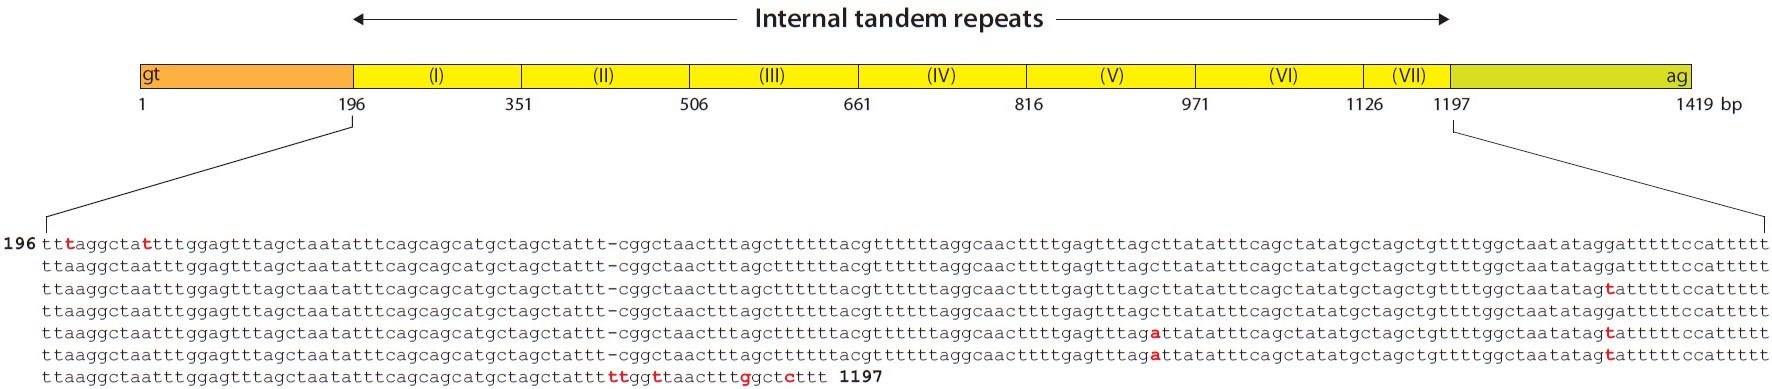 Internal tandem repeats in the intron 3 of Oryzias javanicus mlc2f gene. Six and half copies of a 155-bp unit (TT[T/A]AGGC…CATTTTT) are repeated in a tandem fashion.